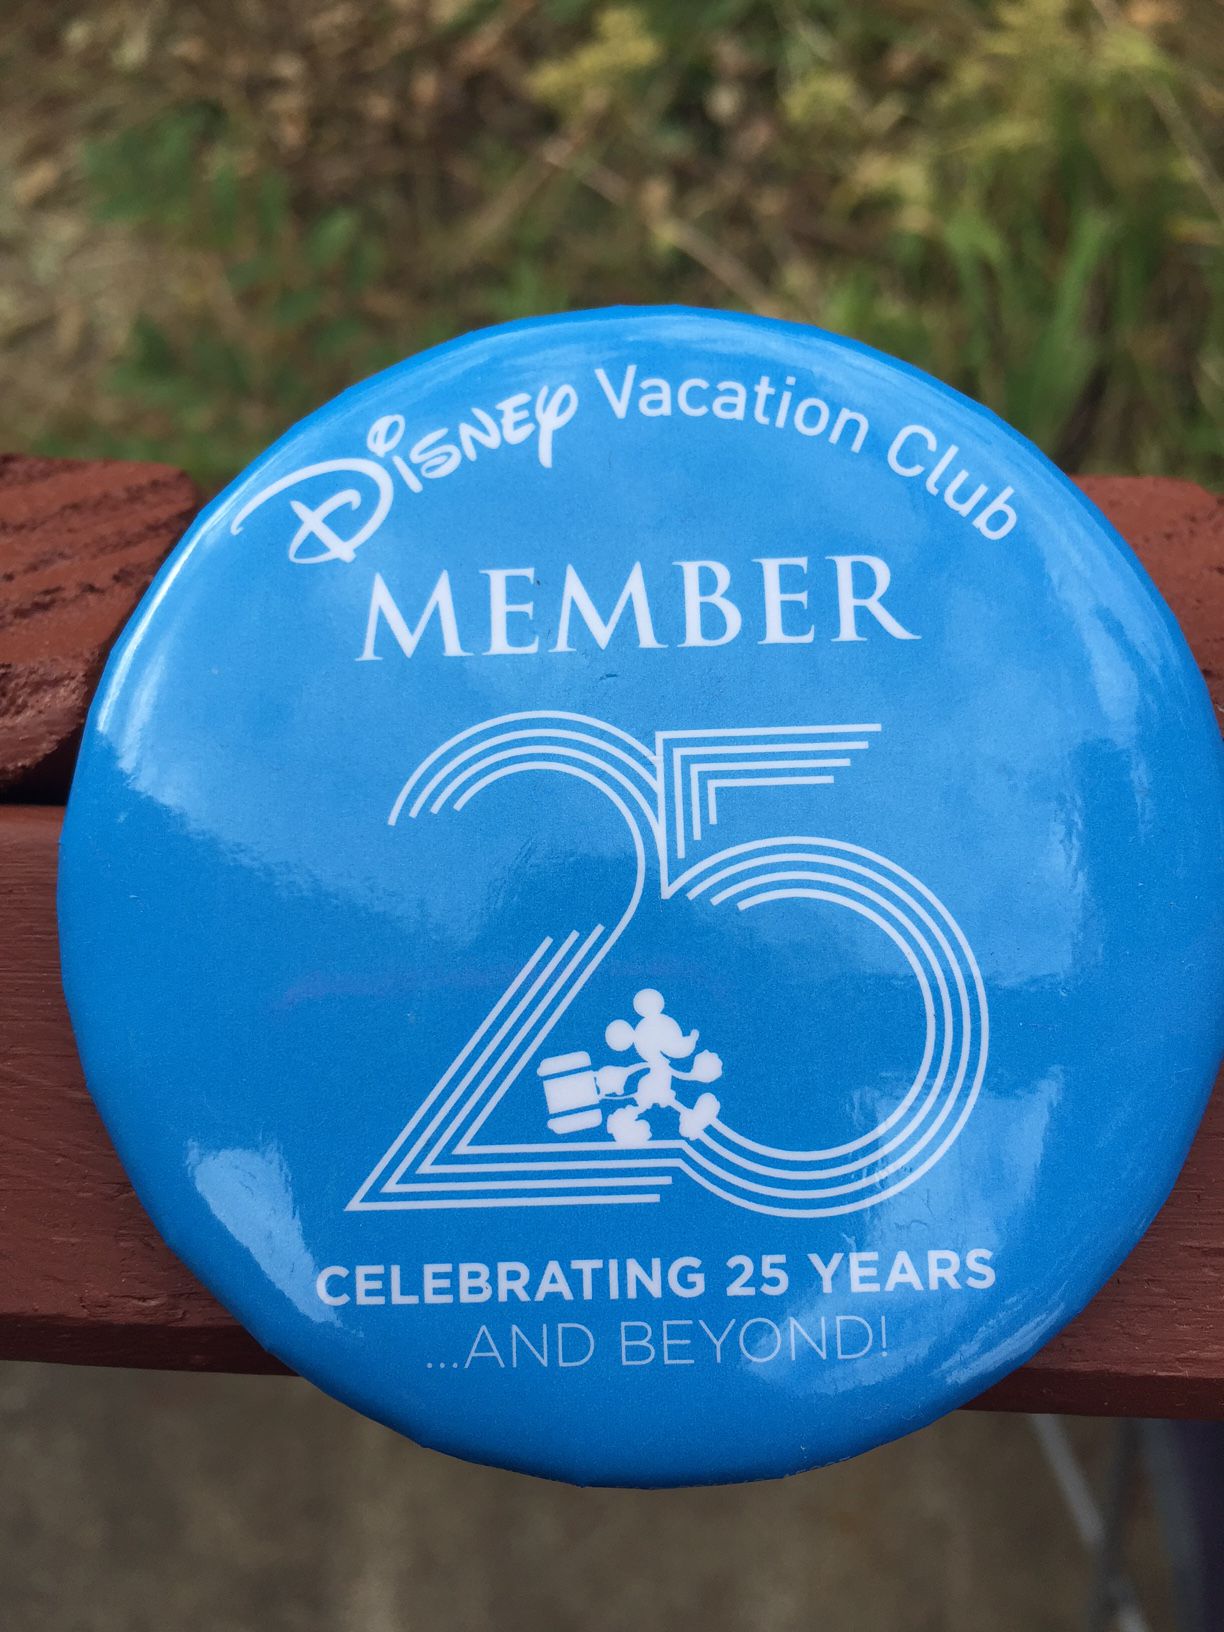 A review of the Disney Vacation Club 25th Anniversary Celrbation Safari Spectacular | PassPorter.com